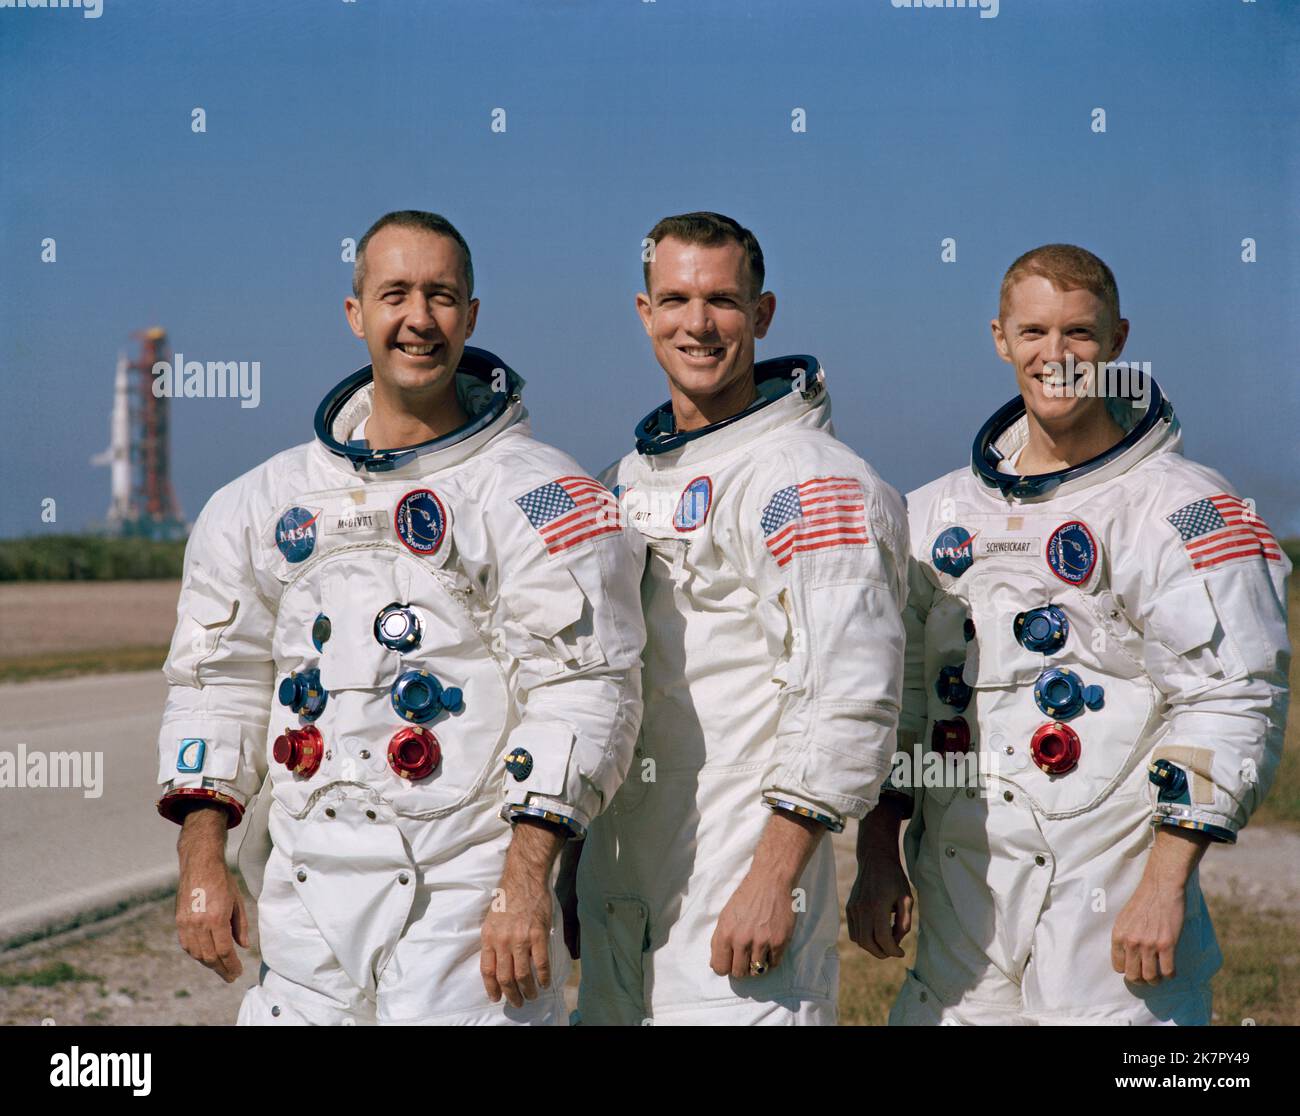 Cape Canaveral, United States. 18th Oct, 2022. NASA Apollo 9 prime crew astronauts, left to right, James McDivitt, David Scott, and Russell Schweickart pose by the Saturn V rocket on Launch Pad 39A at the Kennedy Space Center, December 18, 1968 in Cape Canaveral, Florida. McDivitt commanded the first Gemini spacewalk mission and commanded Apollo 9 during the first crewed orbital flight of a the lunar module, died October 15, 2022 at age 93. Credit: NASA/NASA/Alamy Live News Stock Photo